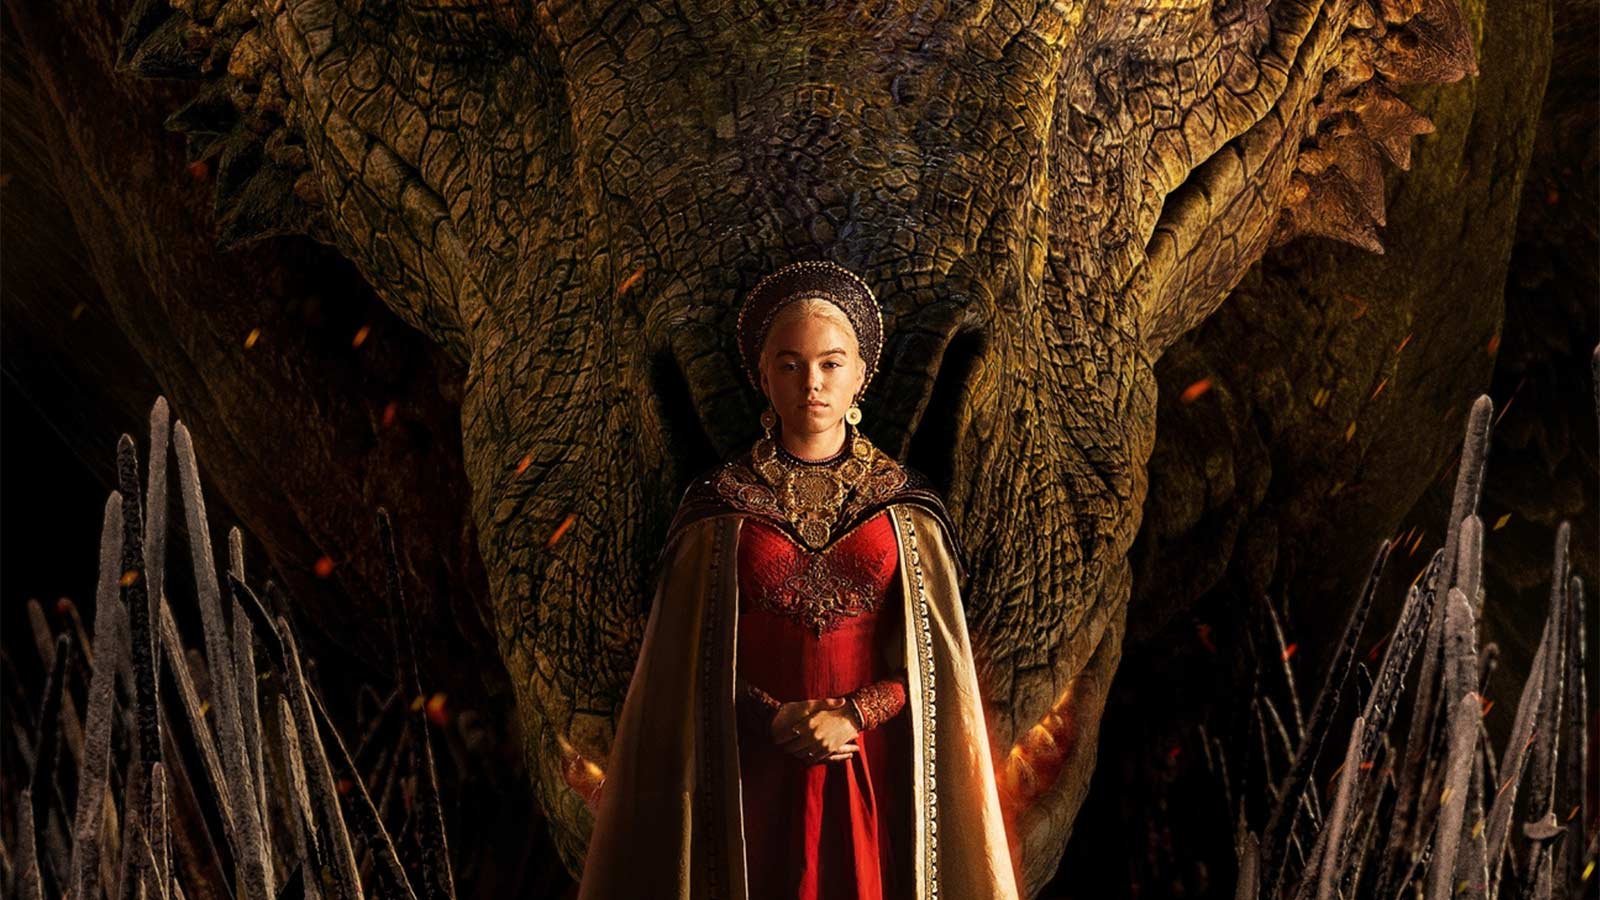 A young woman stands in front of a large Dragon head